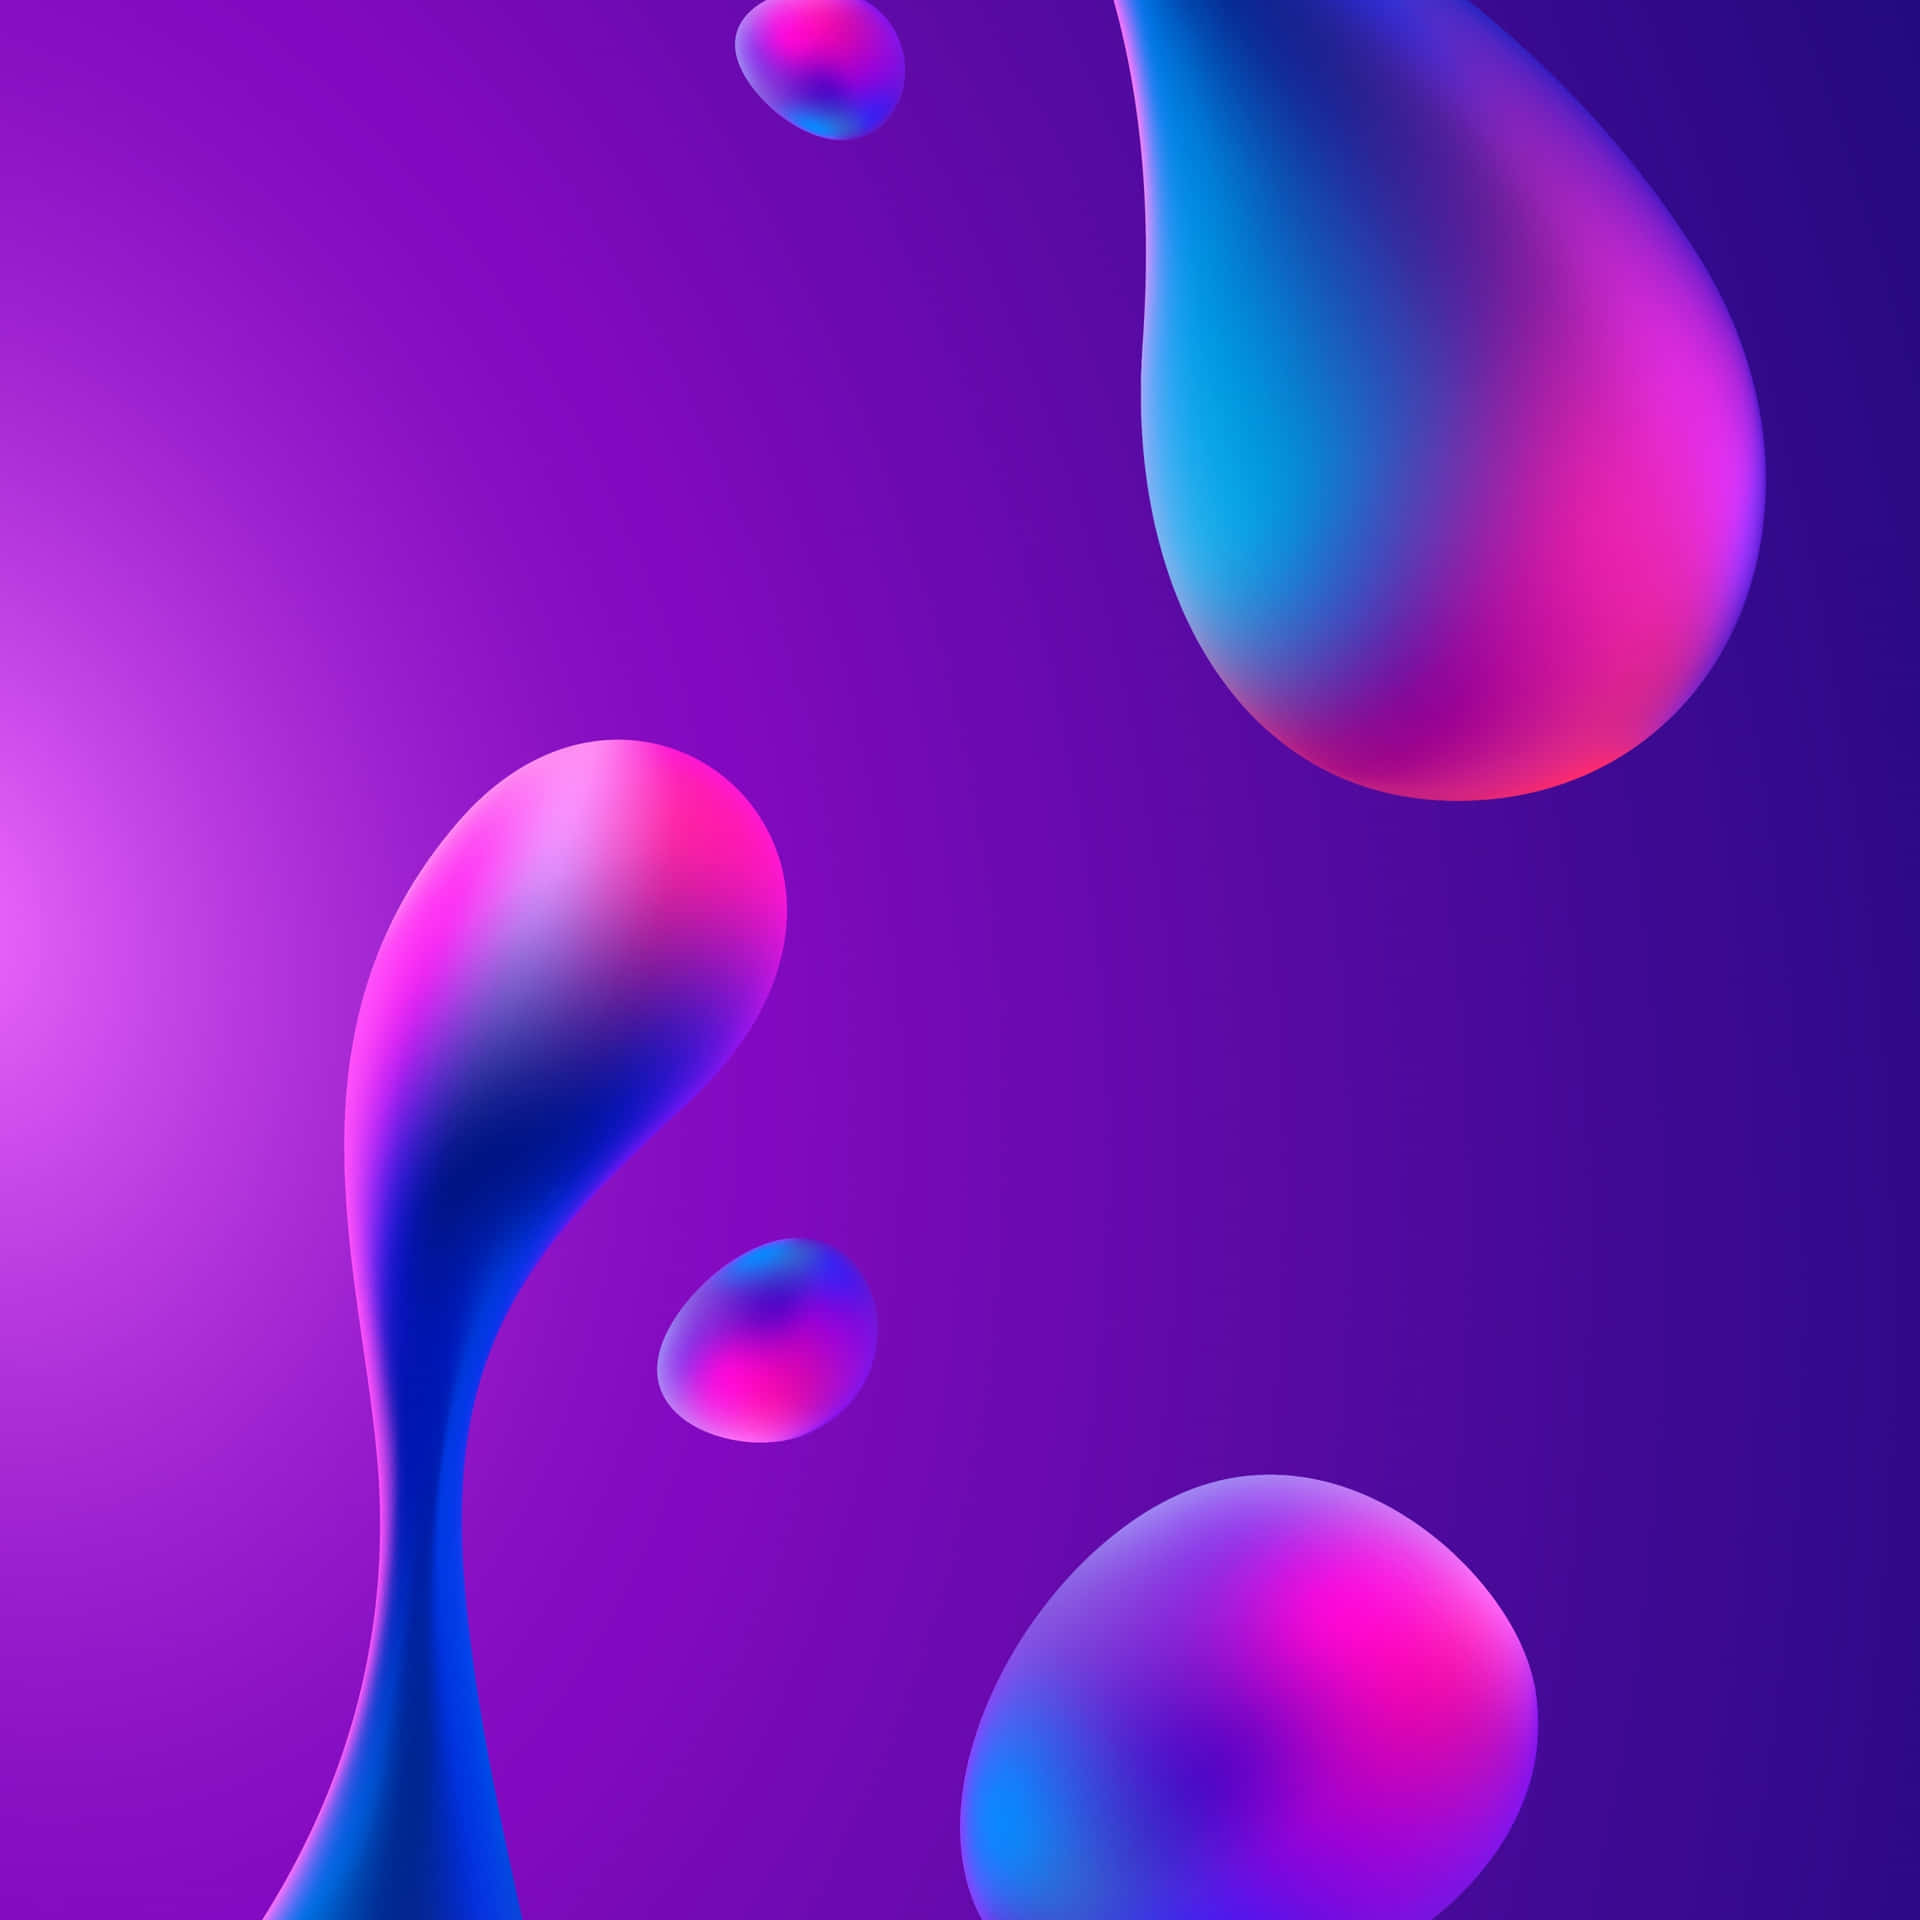 A Purple And Blue Background With Drops Of Liquid Wallpaper